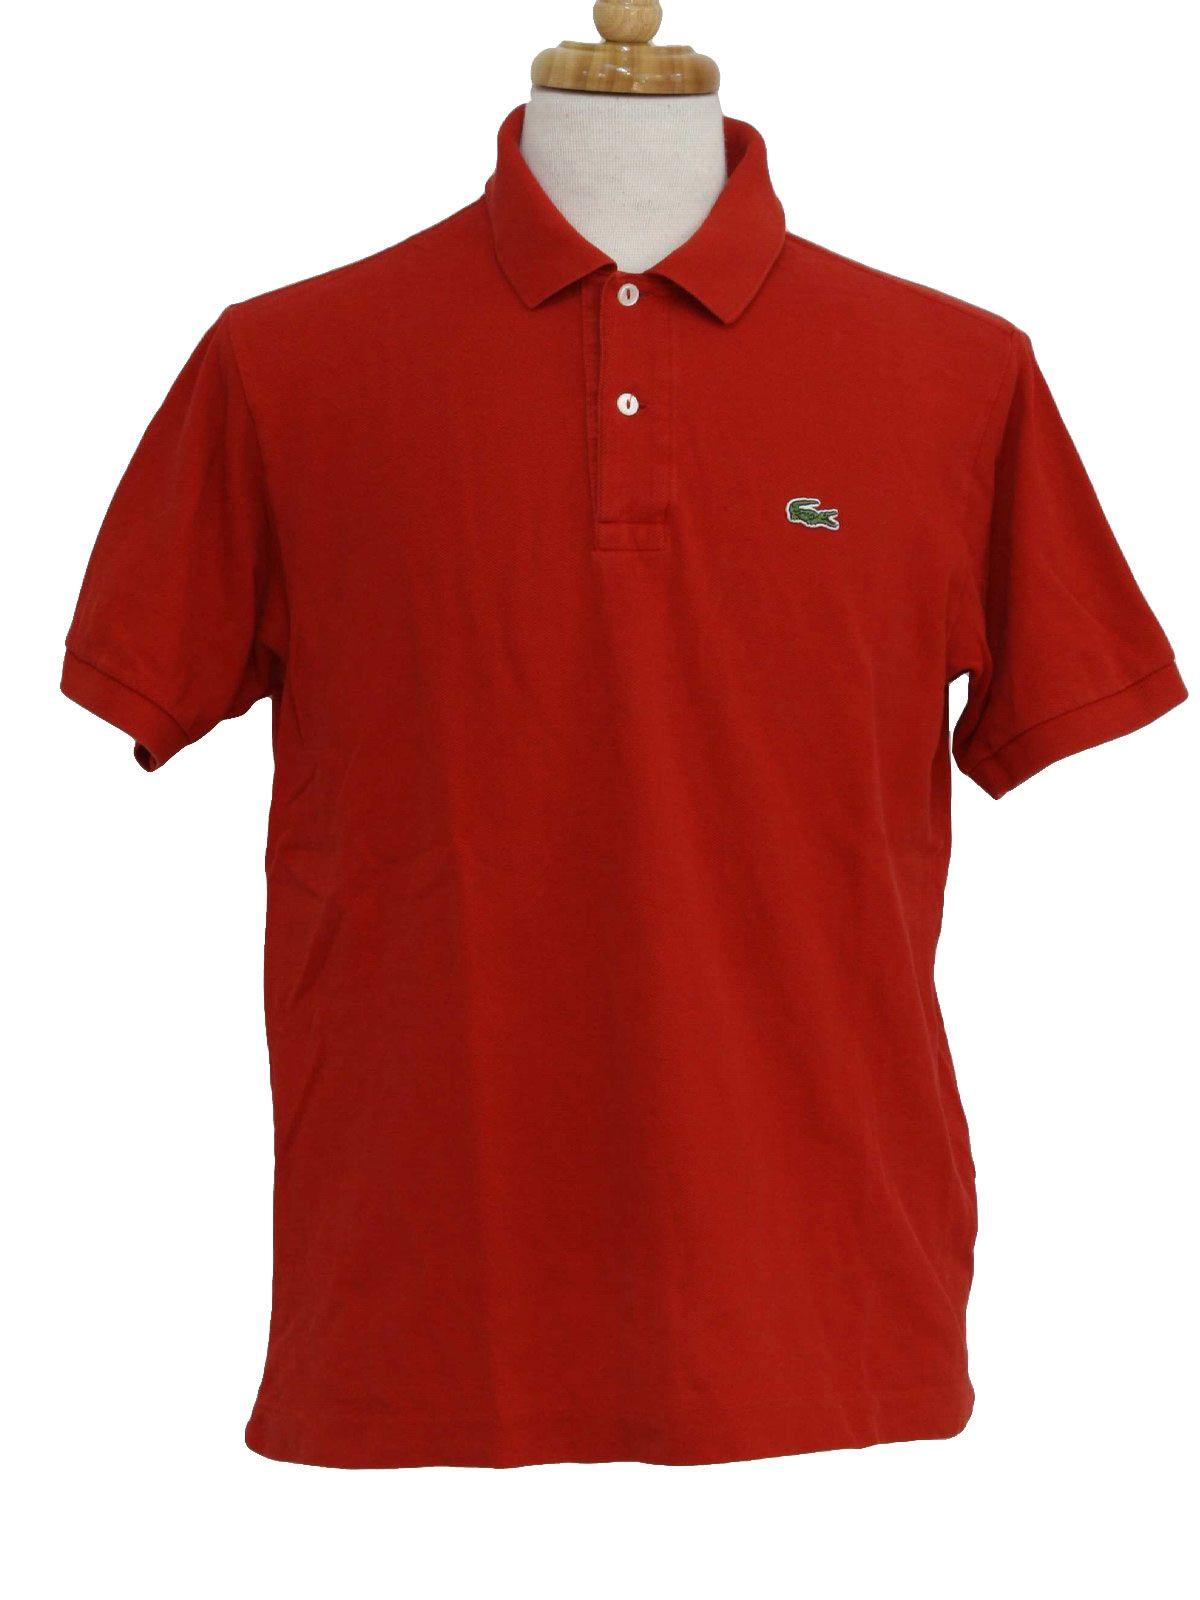 1980s Izod Logo - 80's Vintage Shirt: 80s -Lacoste- Mens red woven cotton short sleeve ...